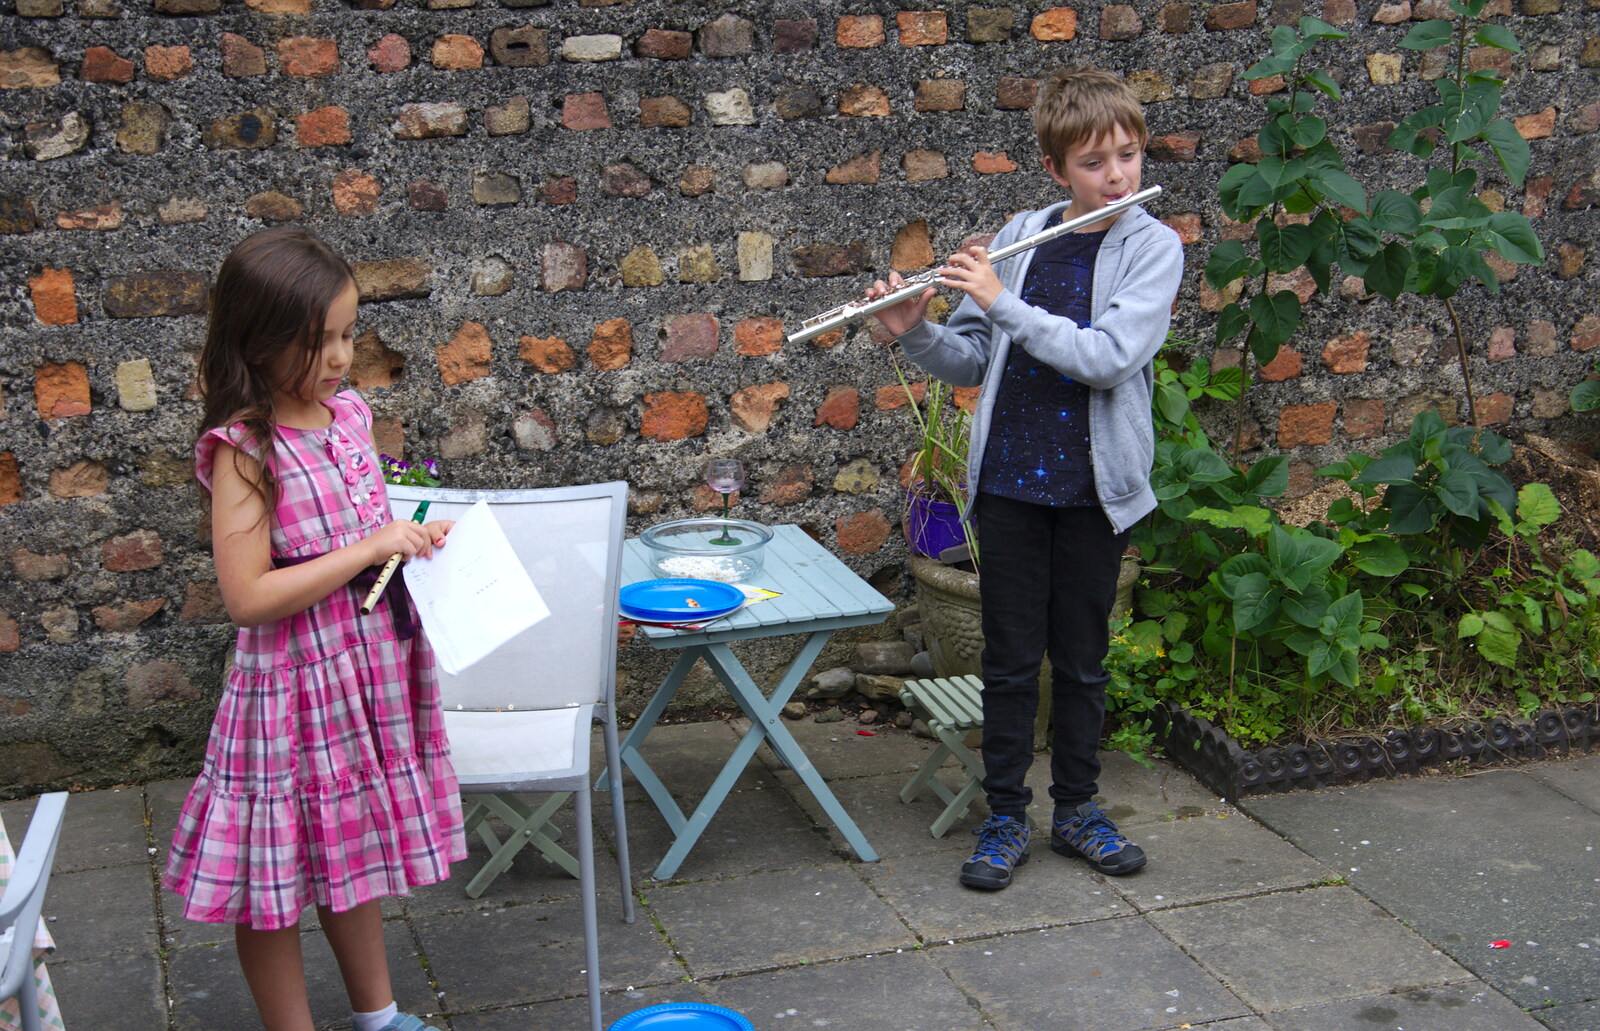 Fred plays the flute from Jimmy and Catherina's, Ballsbridge, Dublin - 10th August 2019